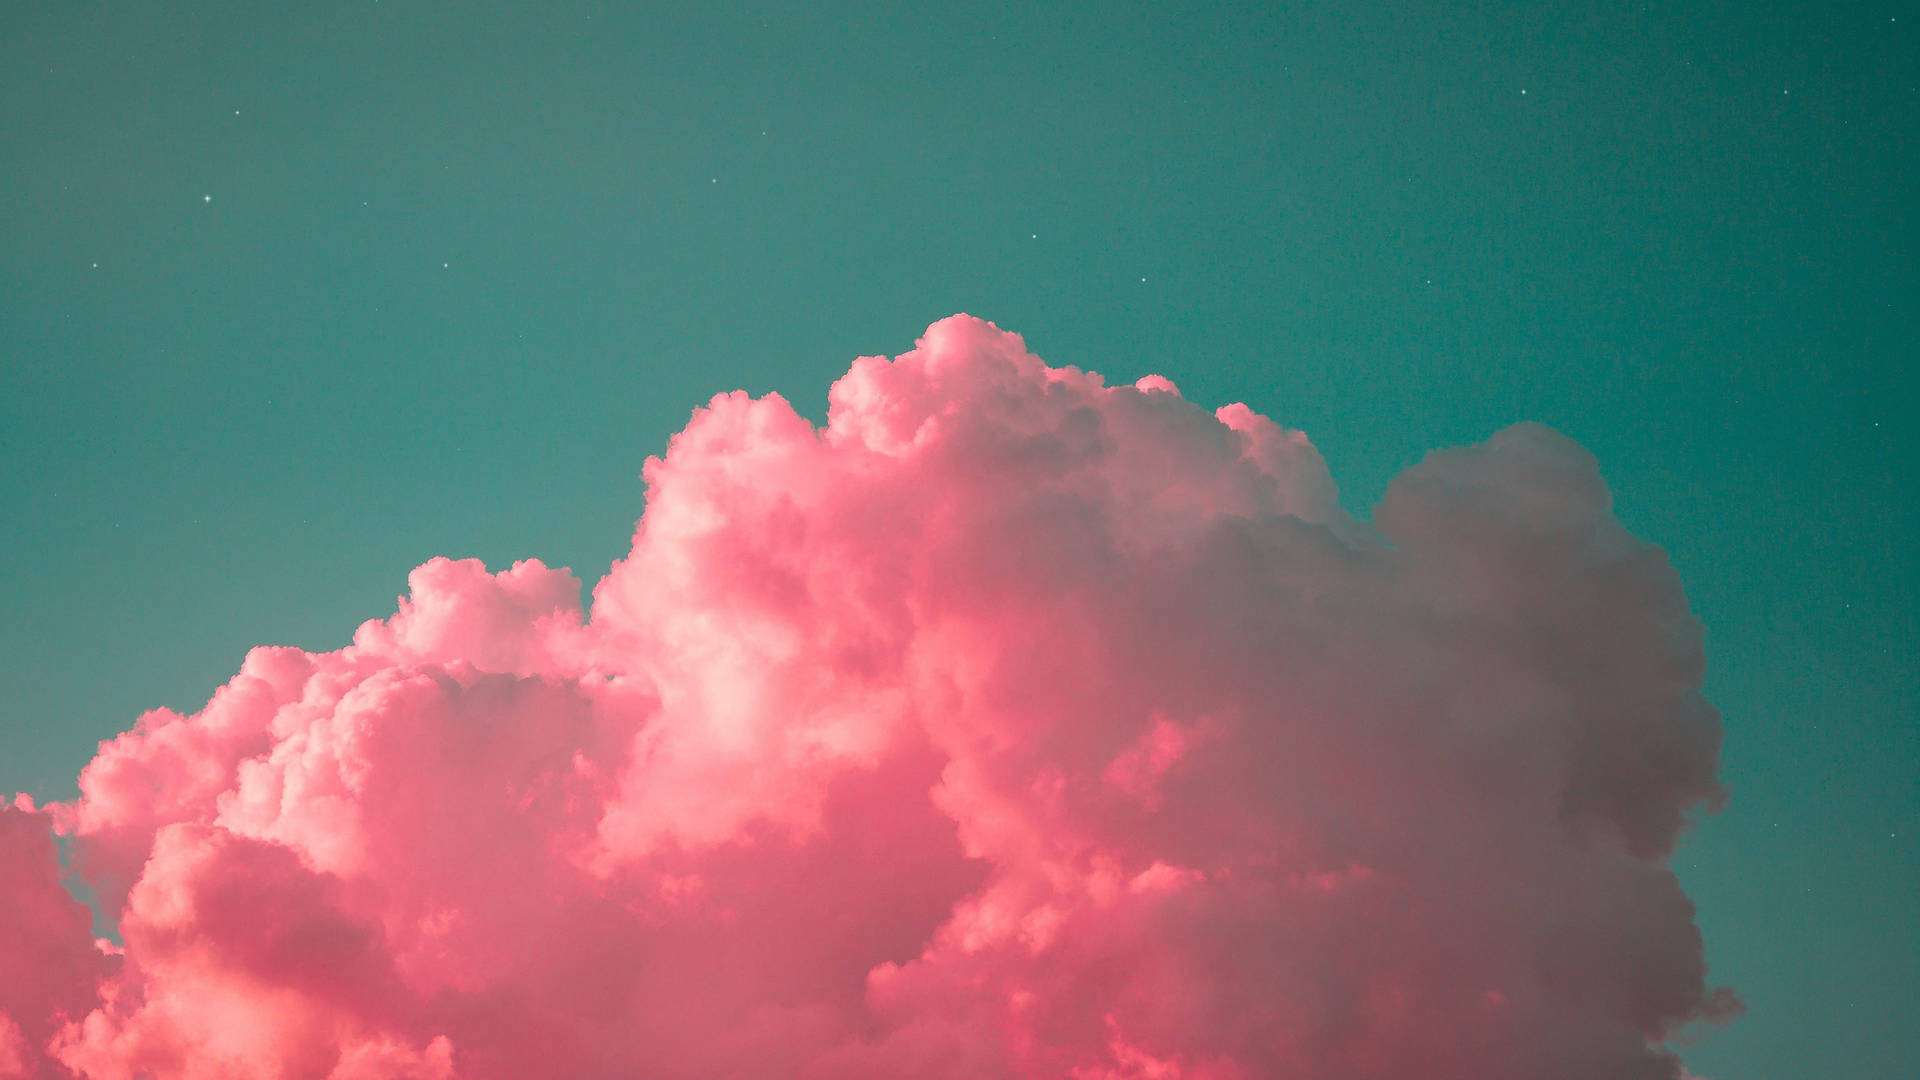 Caption: Mesmerizing Pink Cloud Enveloped in a Lush Teal Sky Wallpaper